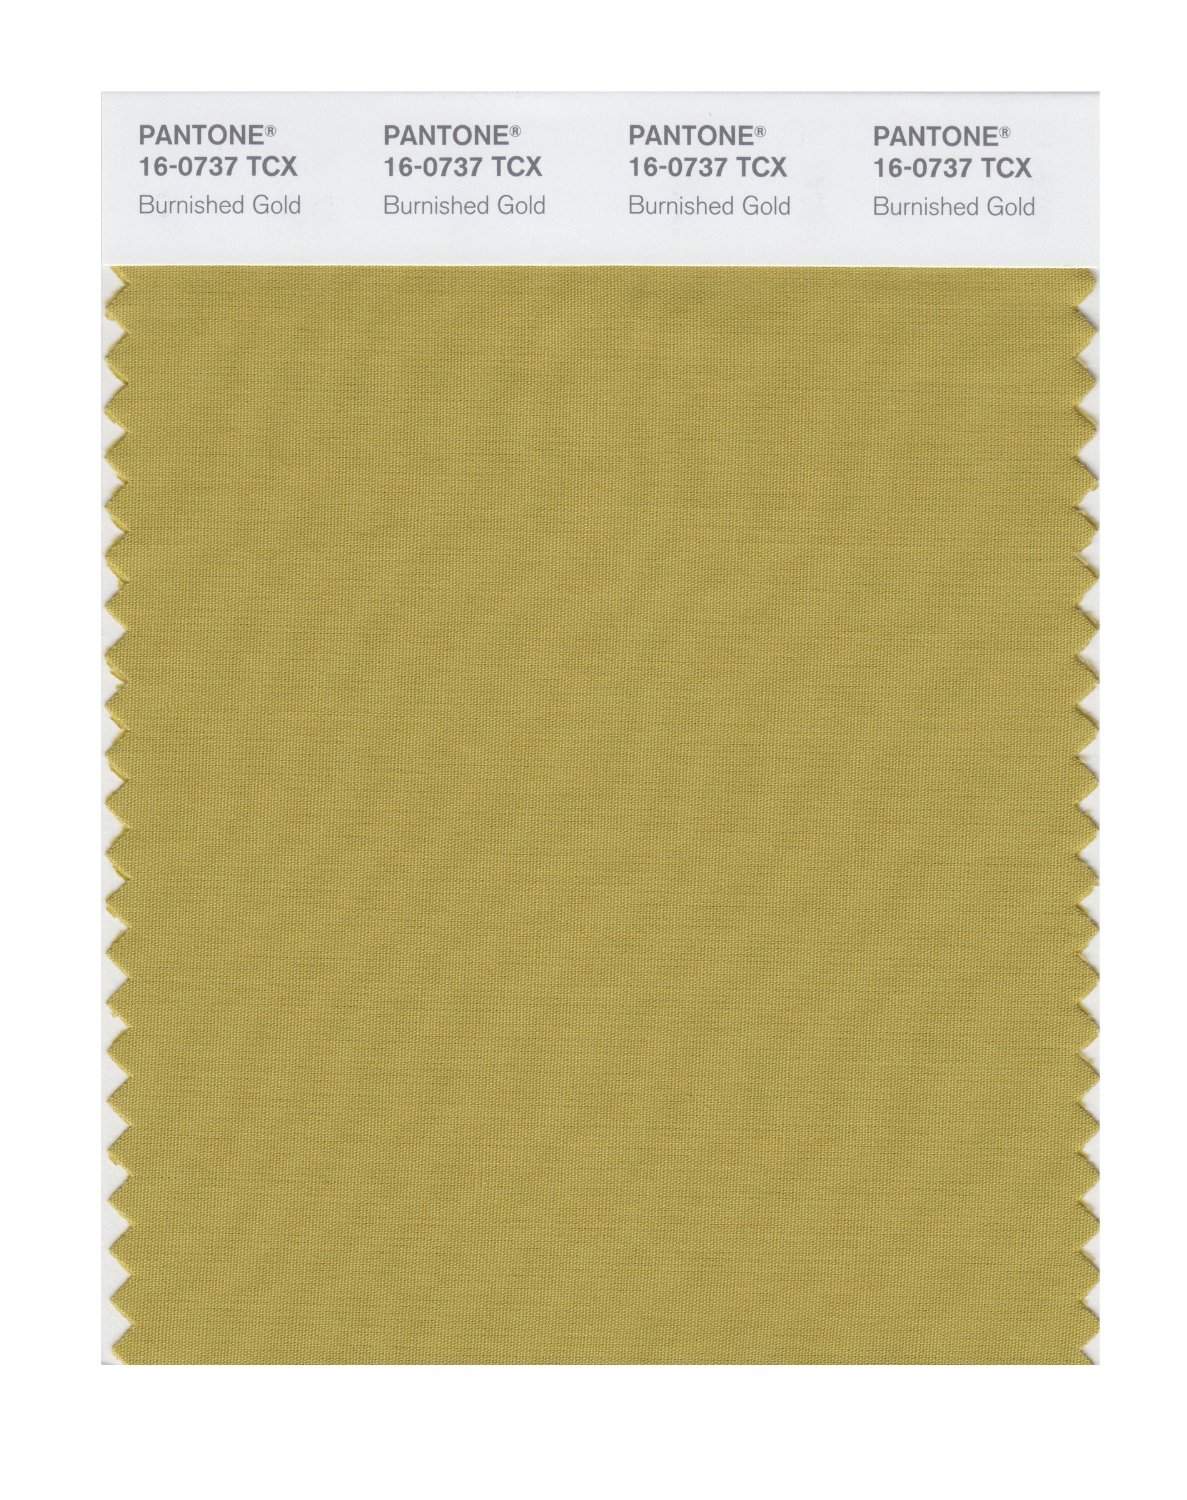 Pantone Cotton Swatch 16-0737 Burnished Gold